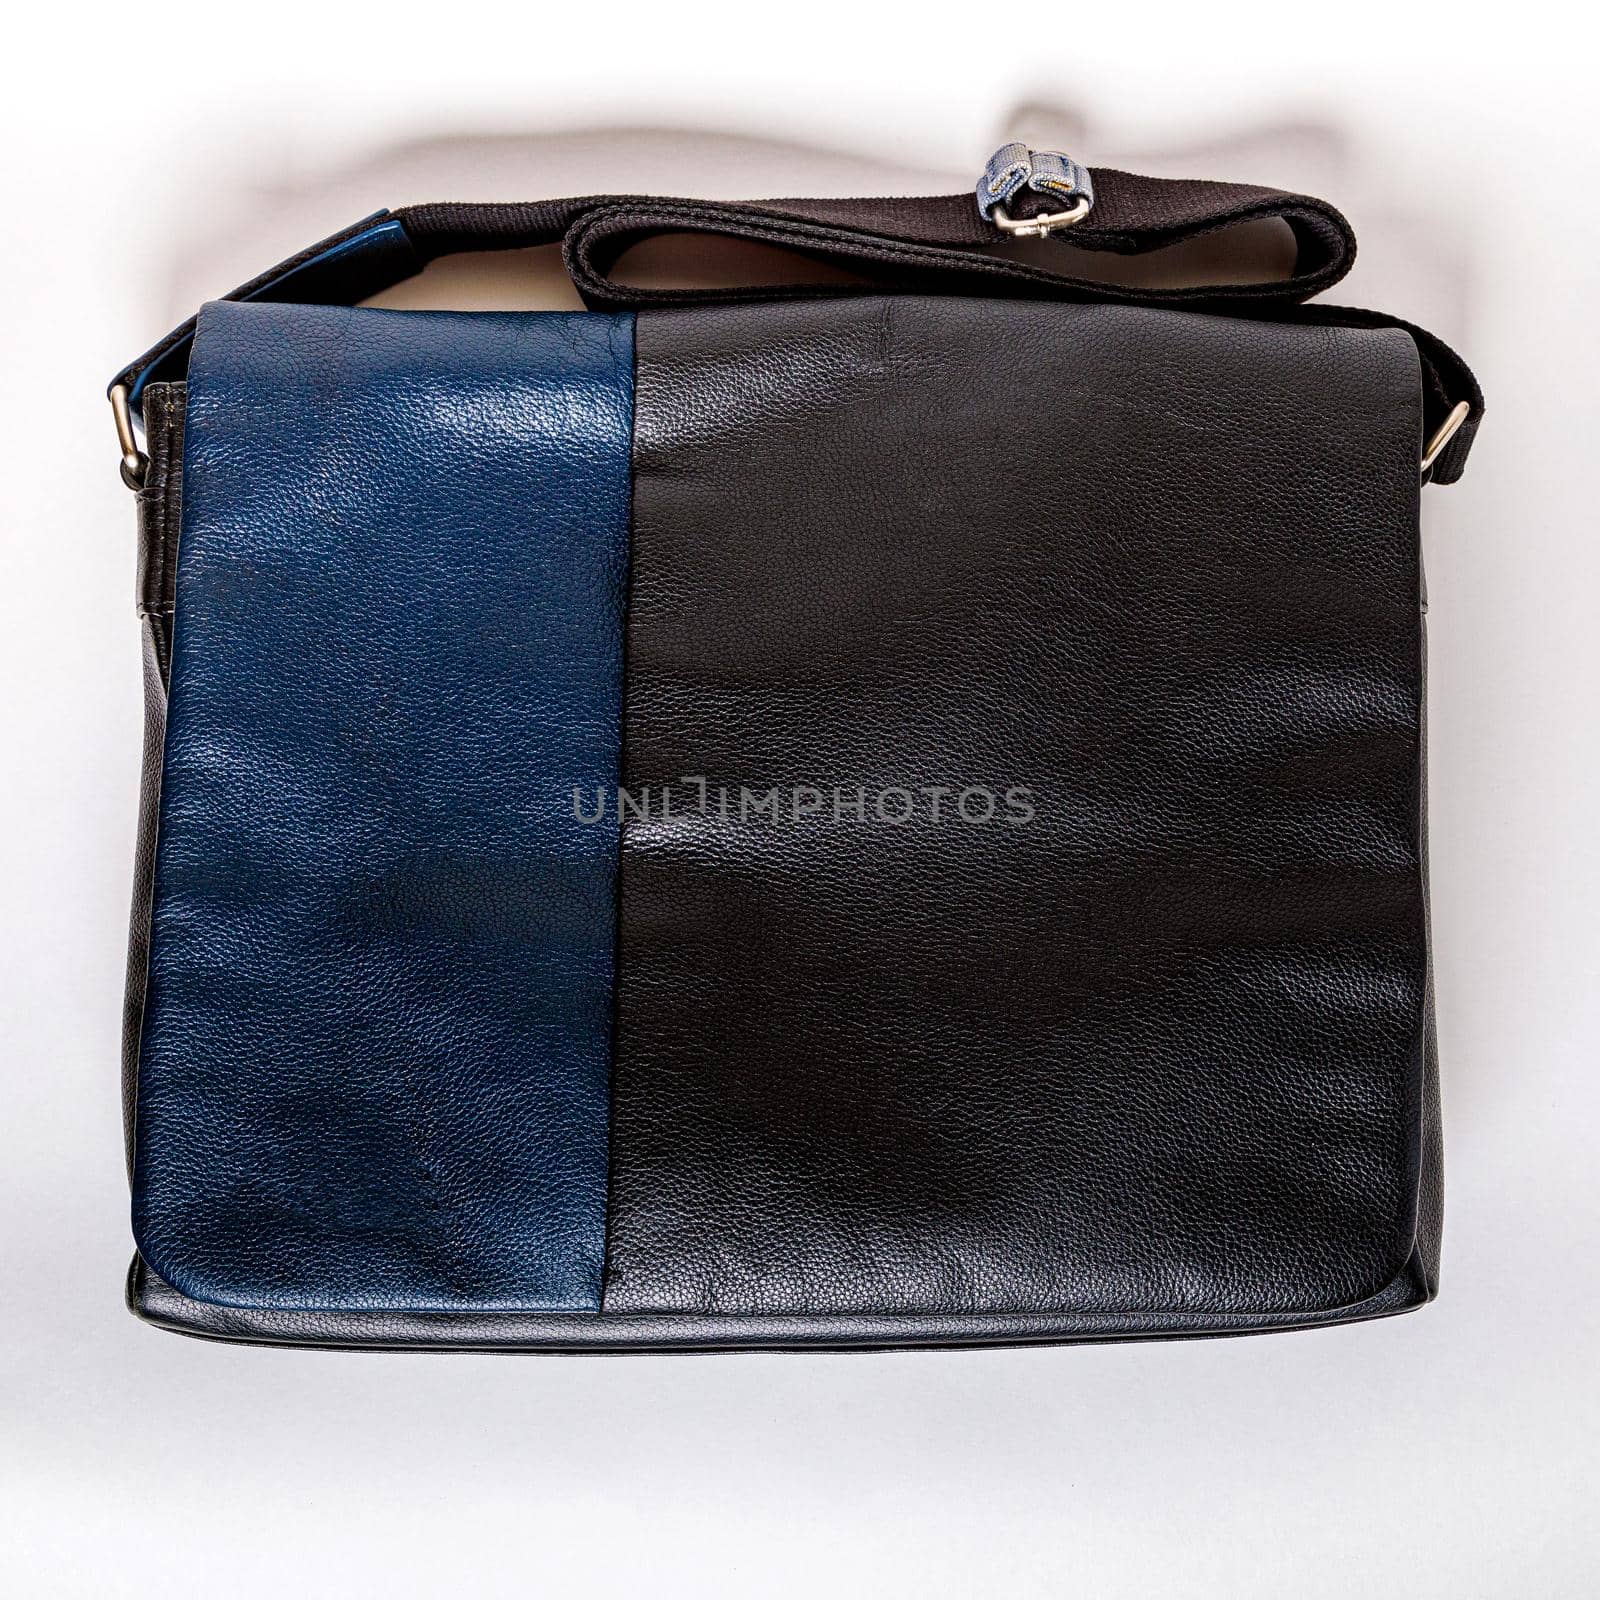 Men's leather bag in black and blue with a shoulder strap. by Yurich32